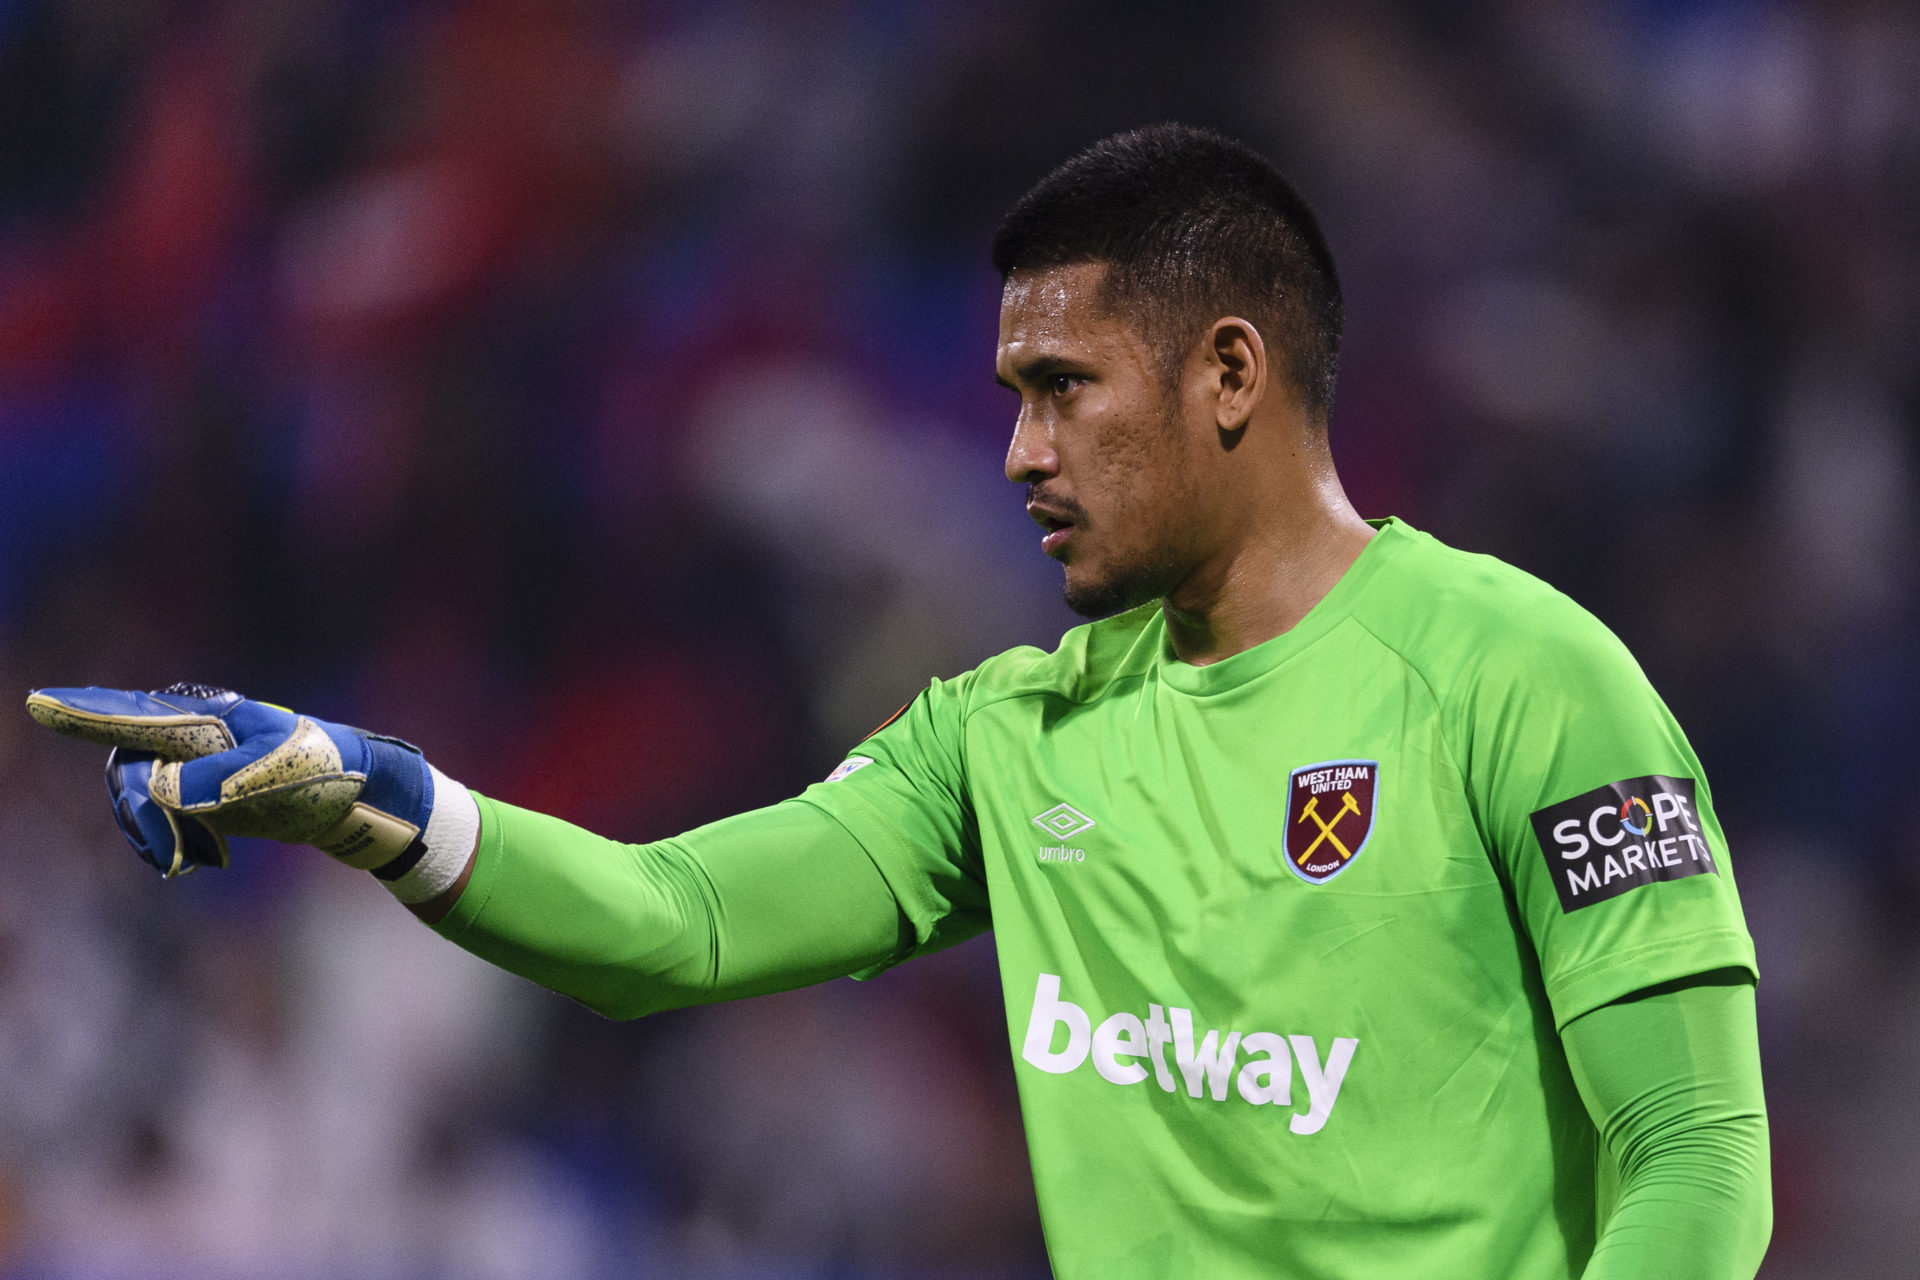 Alphonse Areola will surely now stay at West Ham permanently after receiving a call-up for the France national team squad